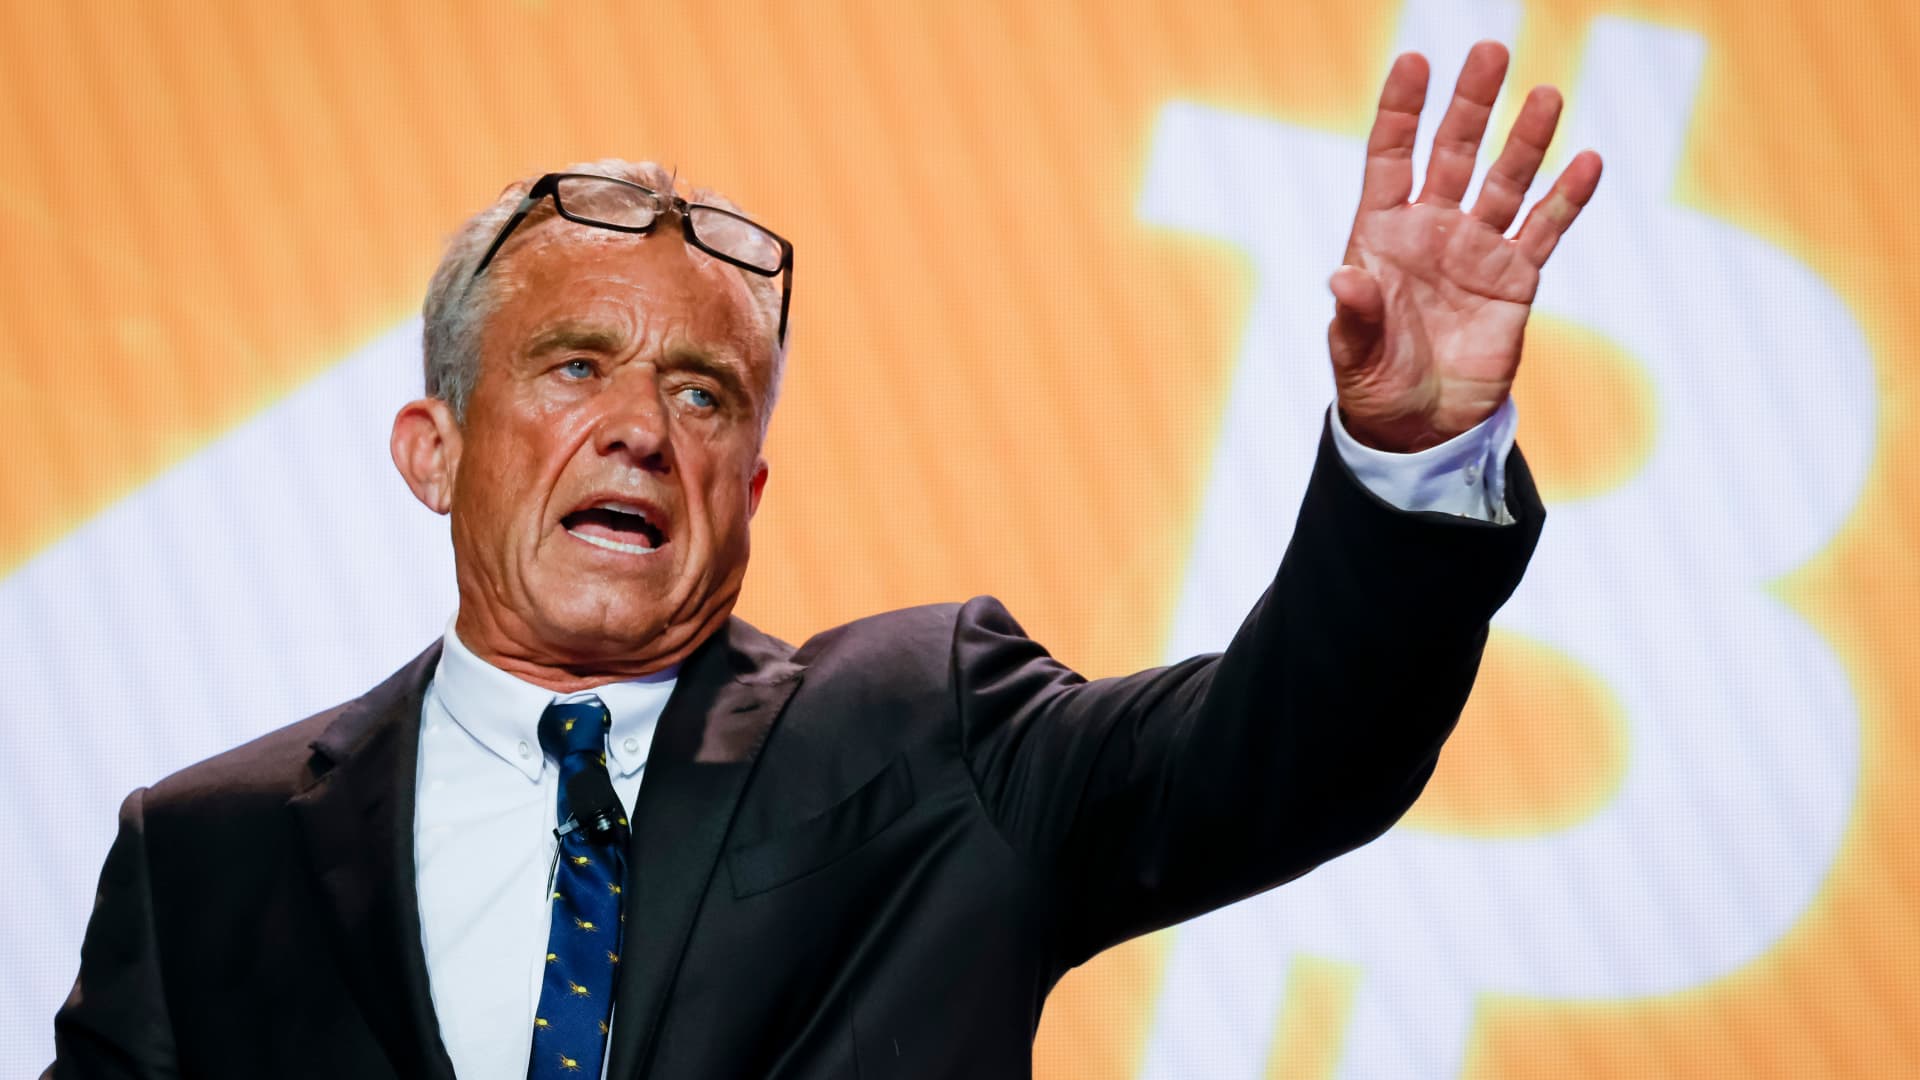 RFK Jr. touted bitcoin, but claimed he was not an trader. Financial information demonstrate or else